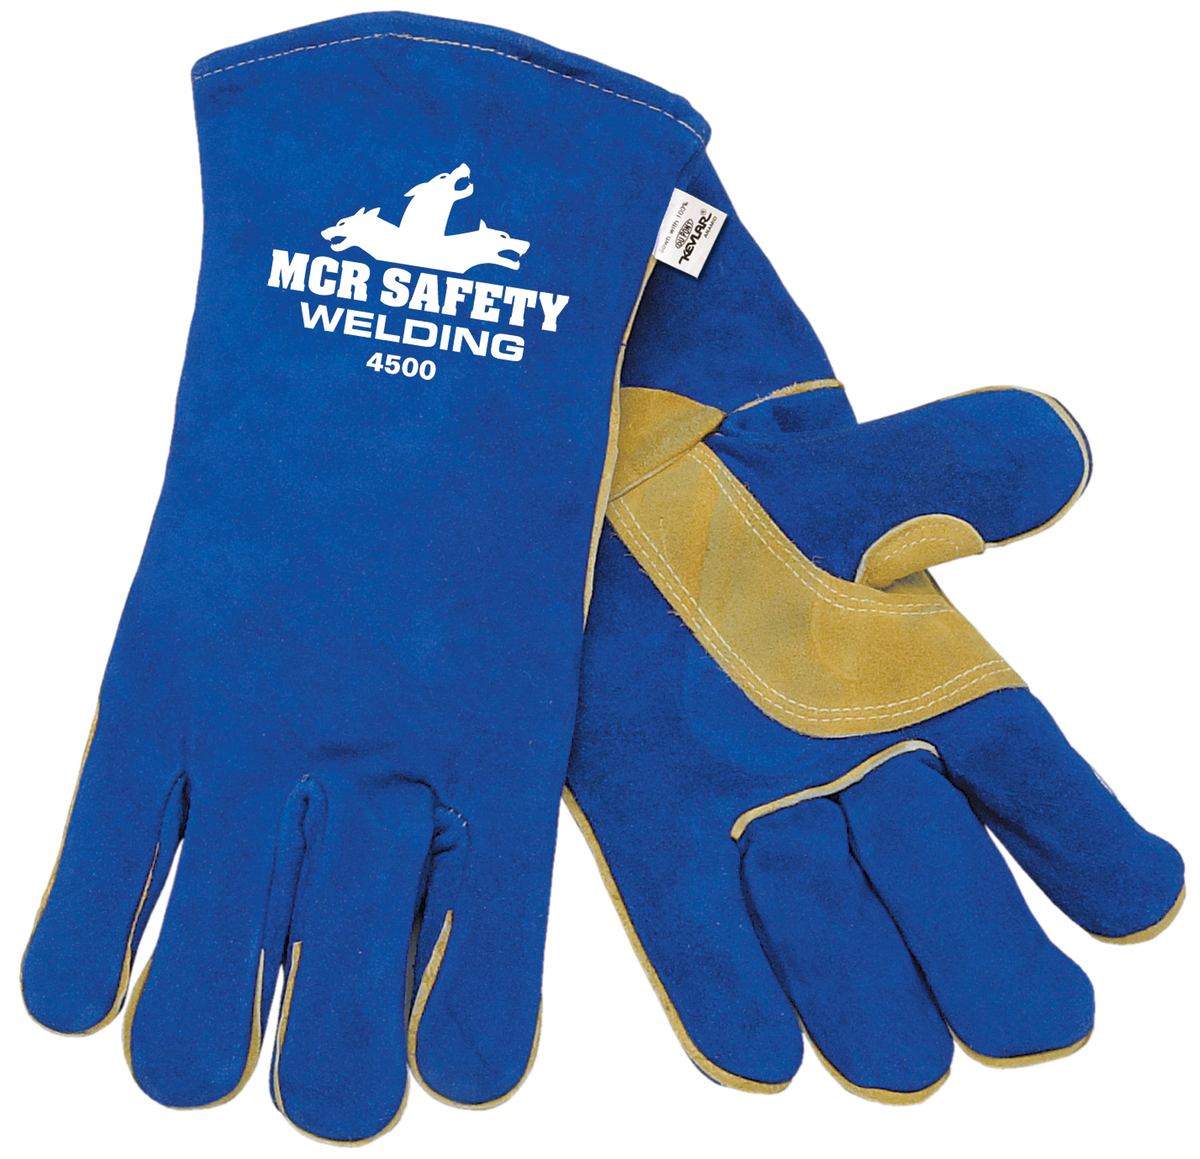 Foam Lined Select Shoulder Cow Skin Leather Welding Work Gloves with Reinforced Wing Thumb